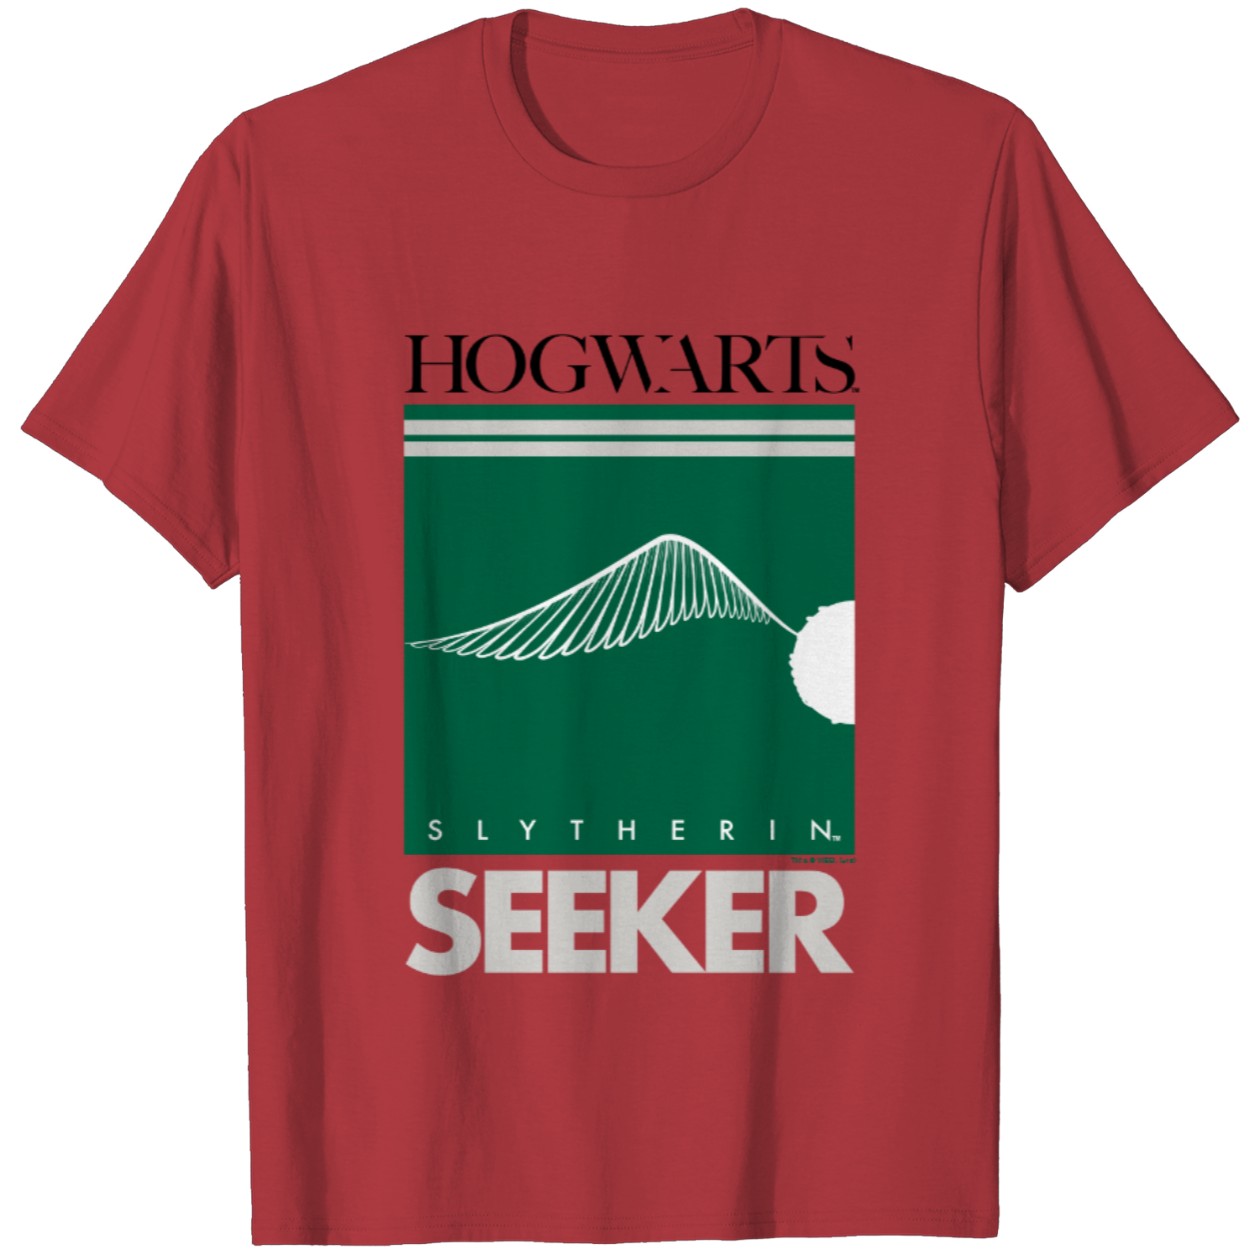 Quidditch Seeker T-Shirt for Slytherin House Fans IYT